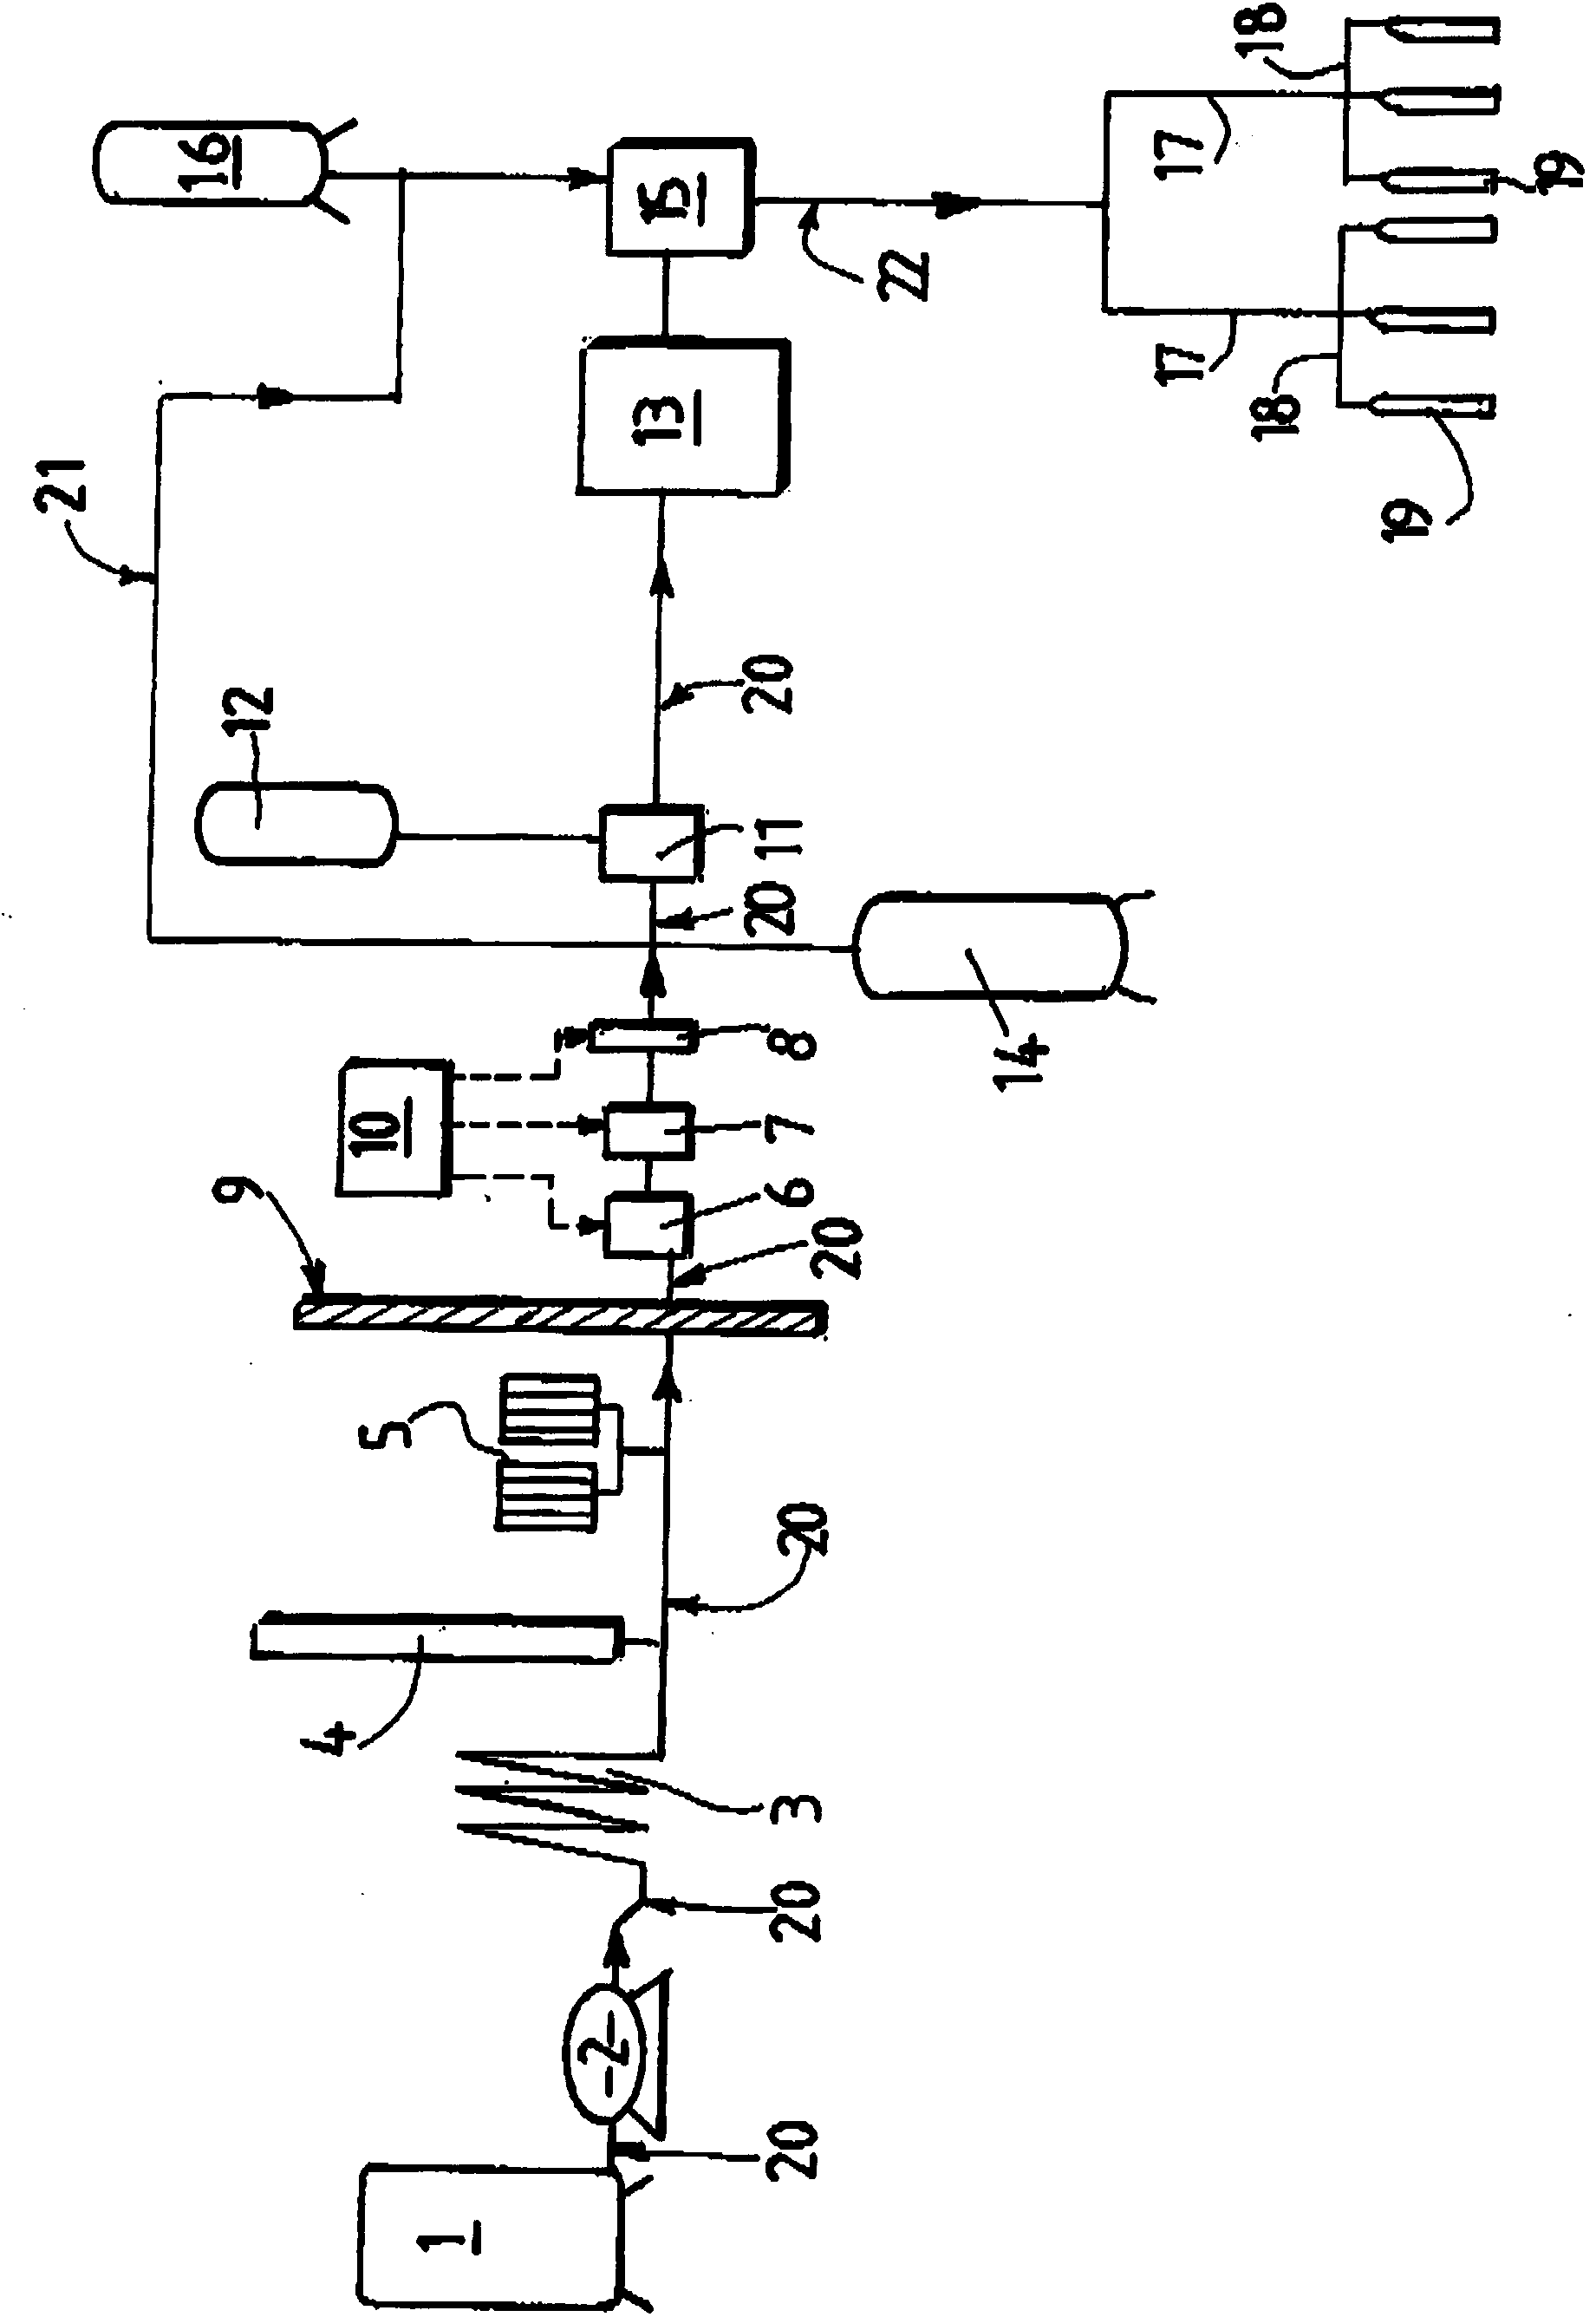 Method for producing no/n2 gaseous mixtures intended for the medical field